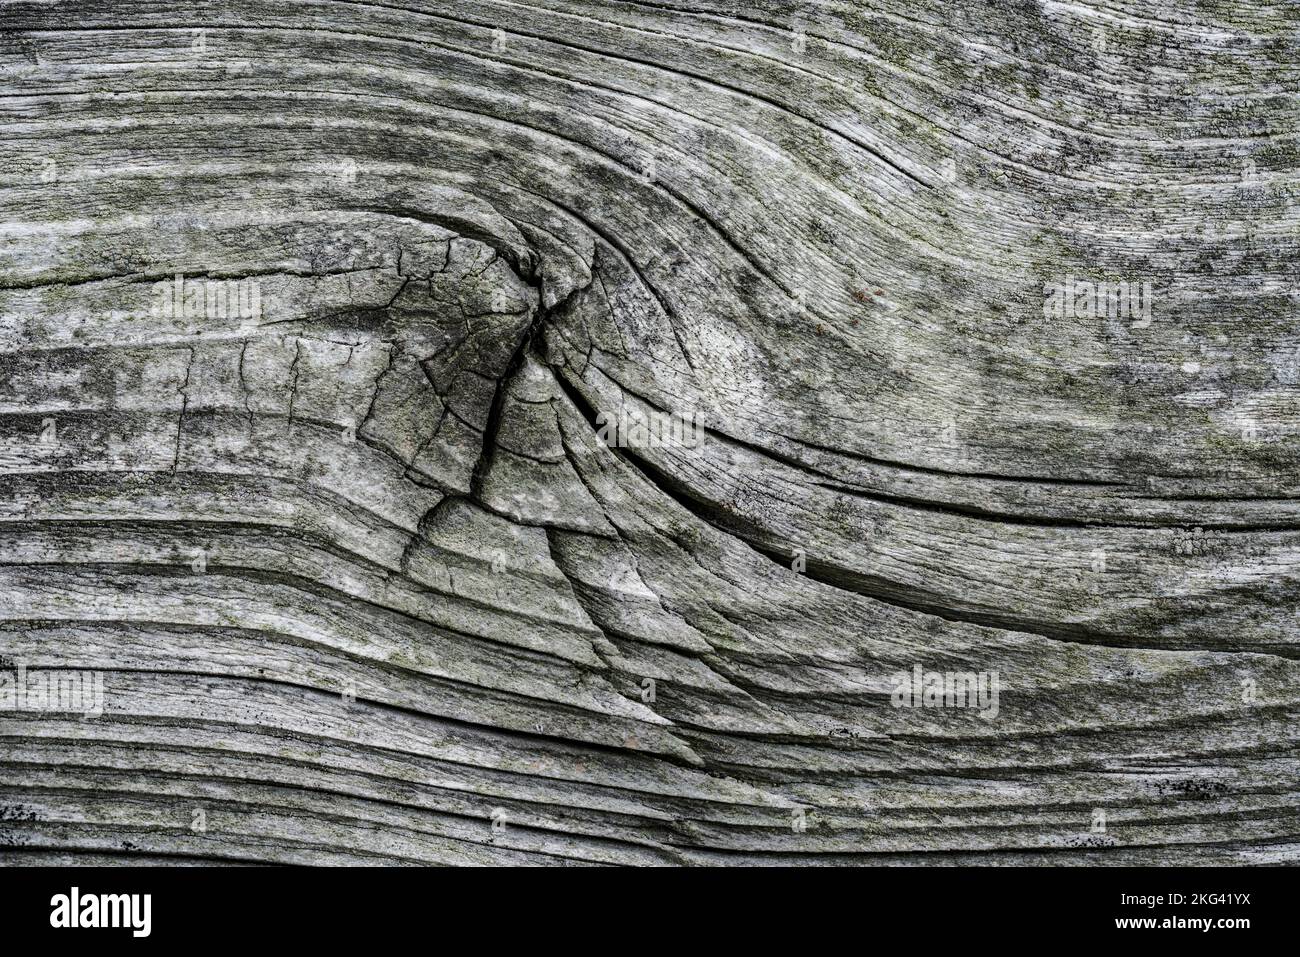 Old wood plank Stock Photo